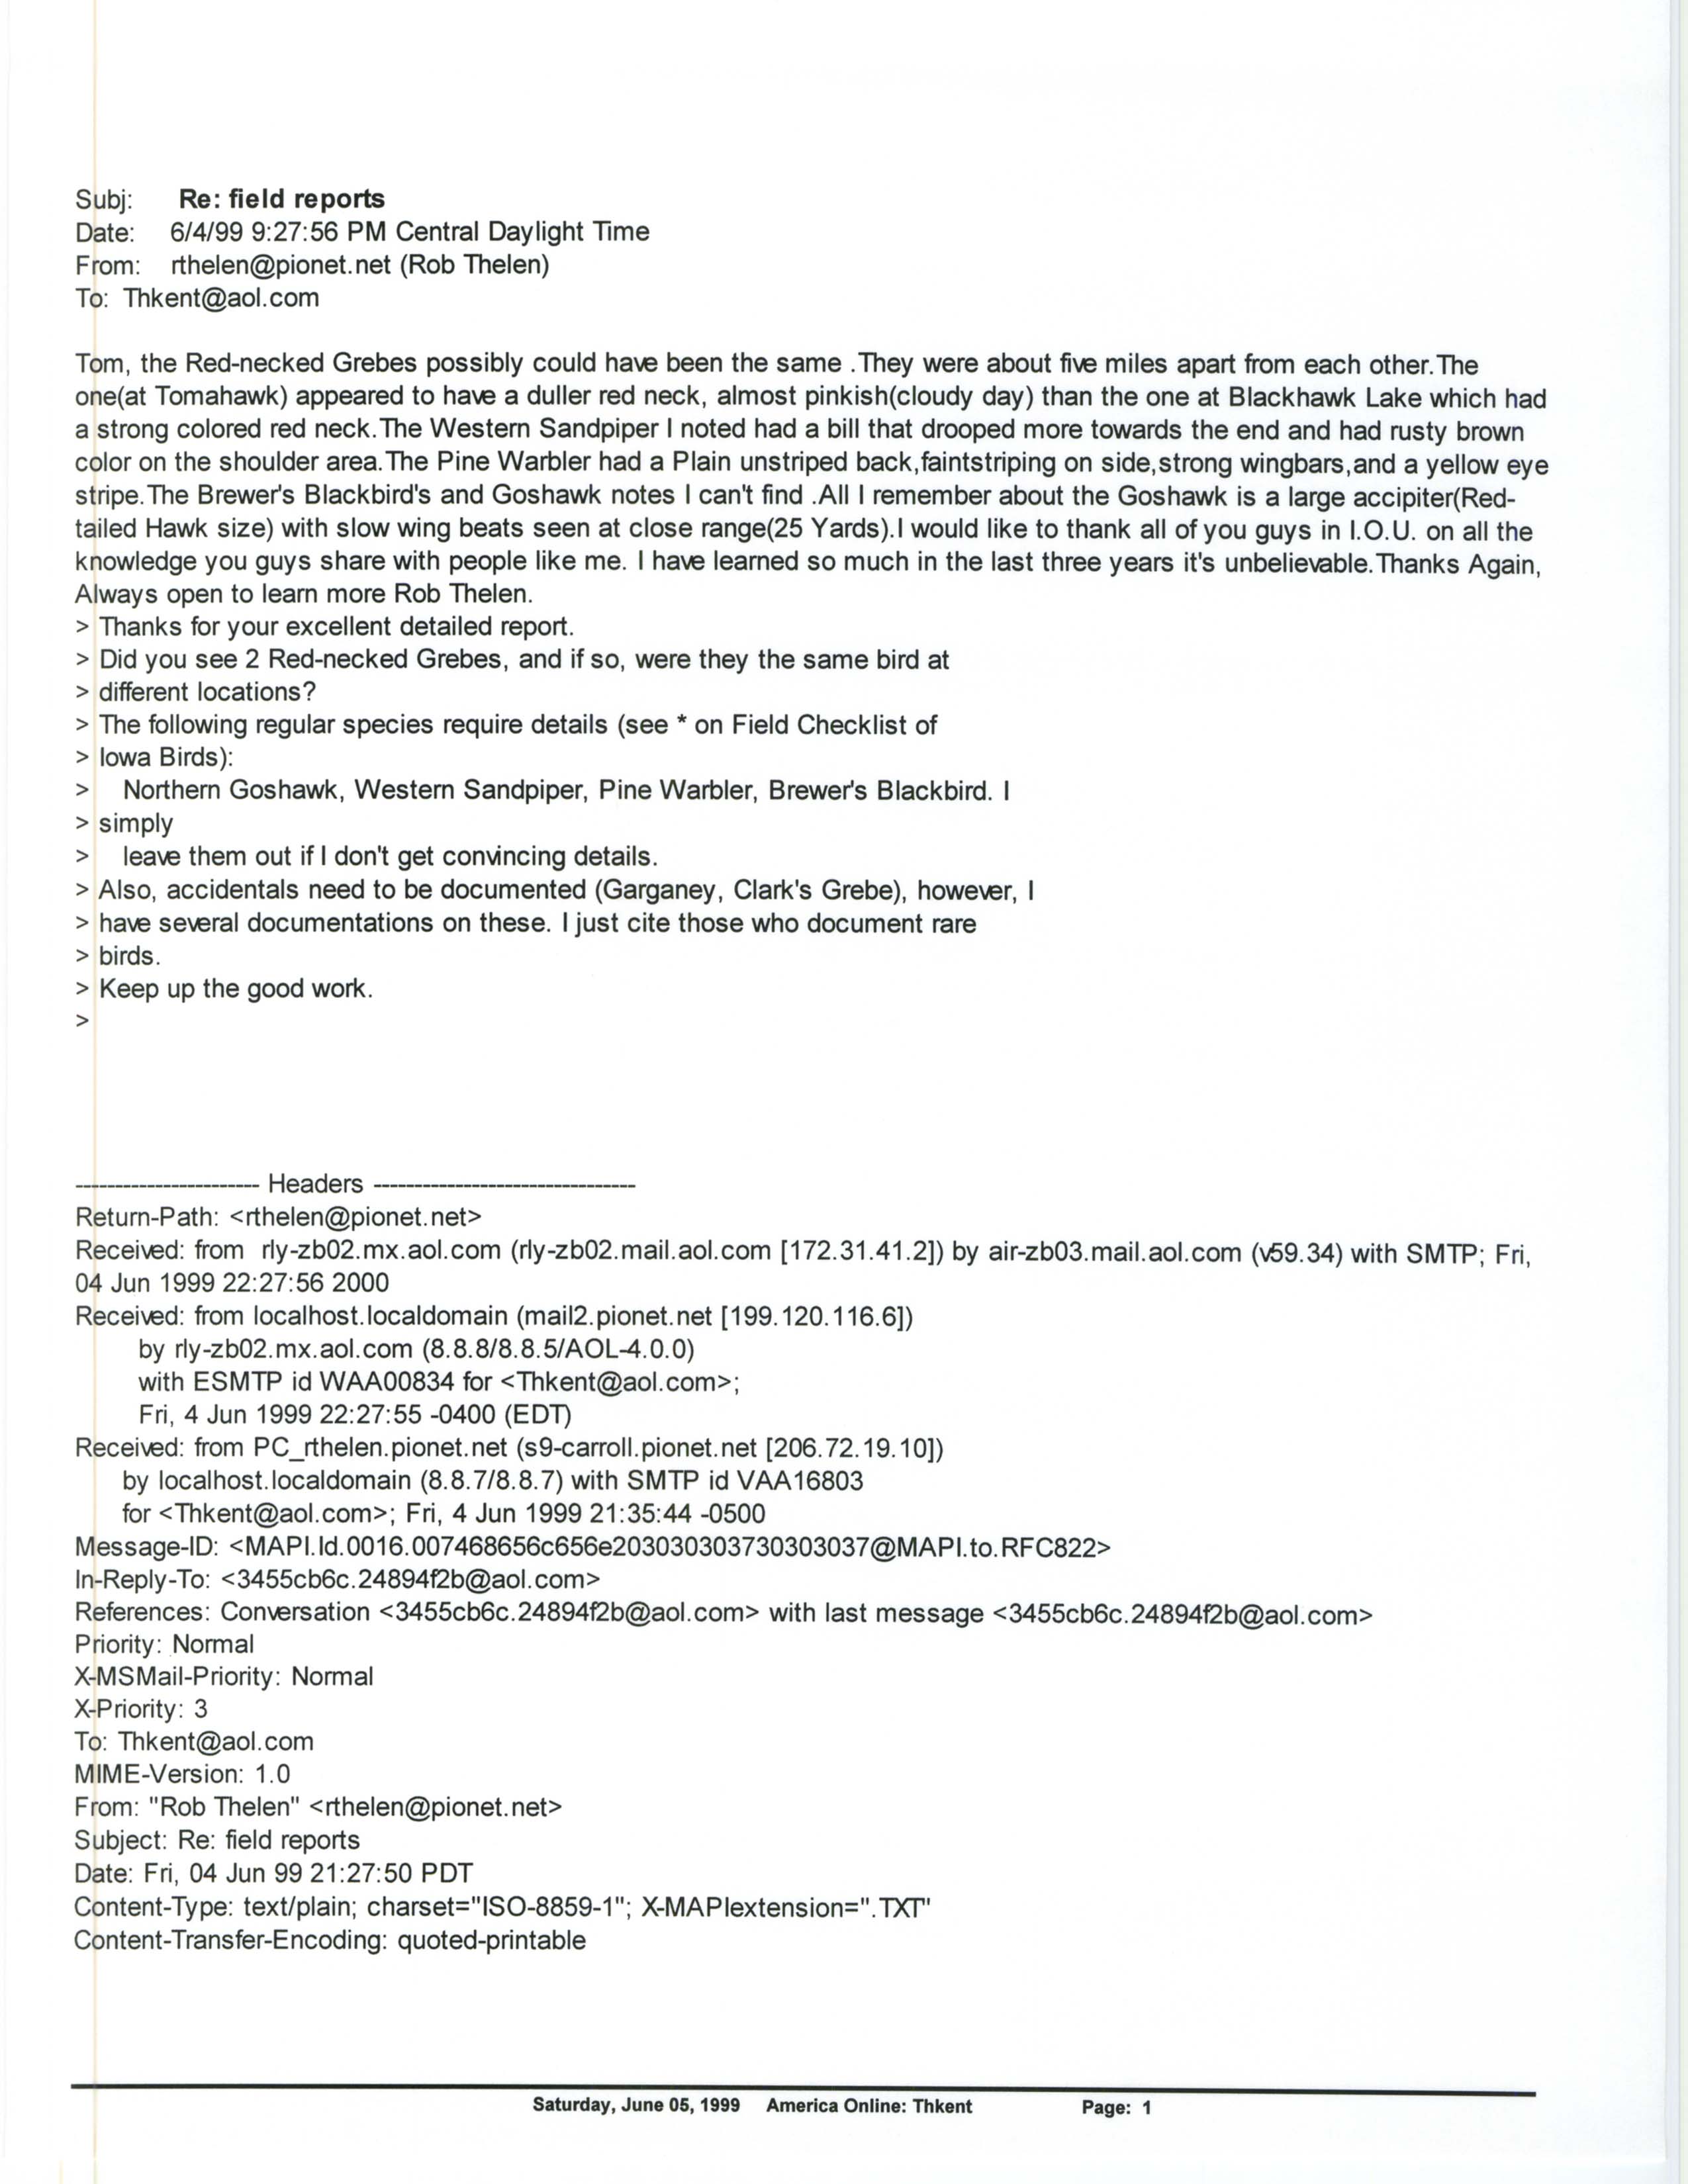 Rob Thelen email to Thomas Kent regarding field reports, June 4, 1999